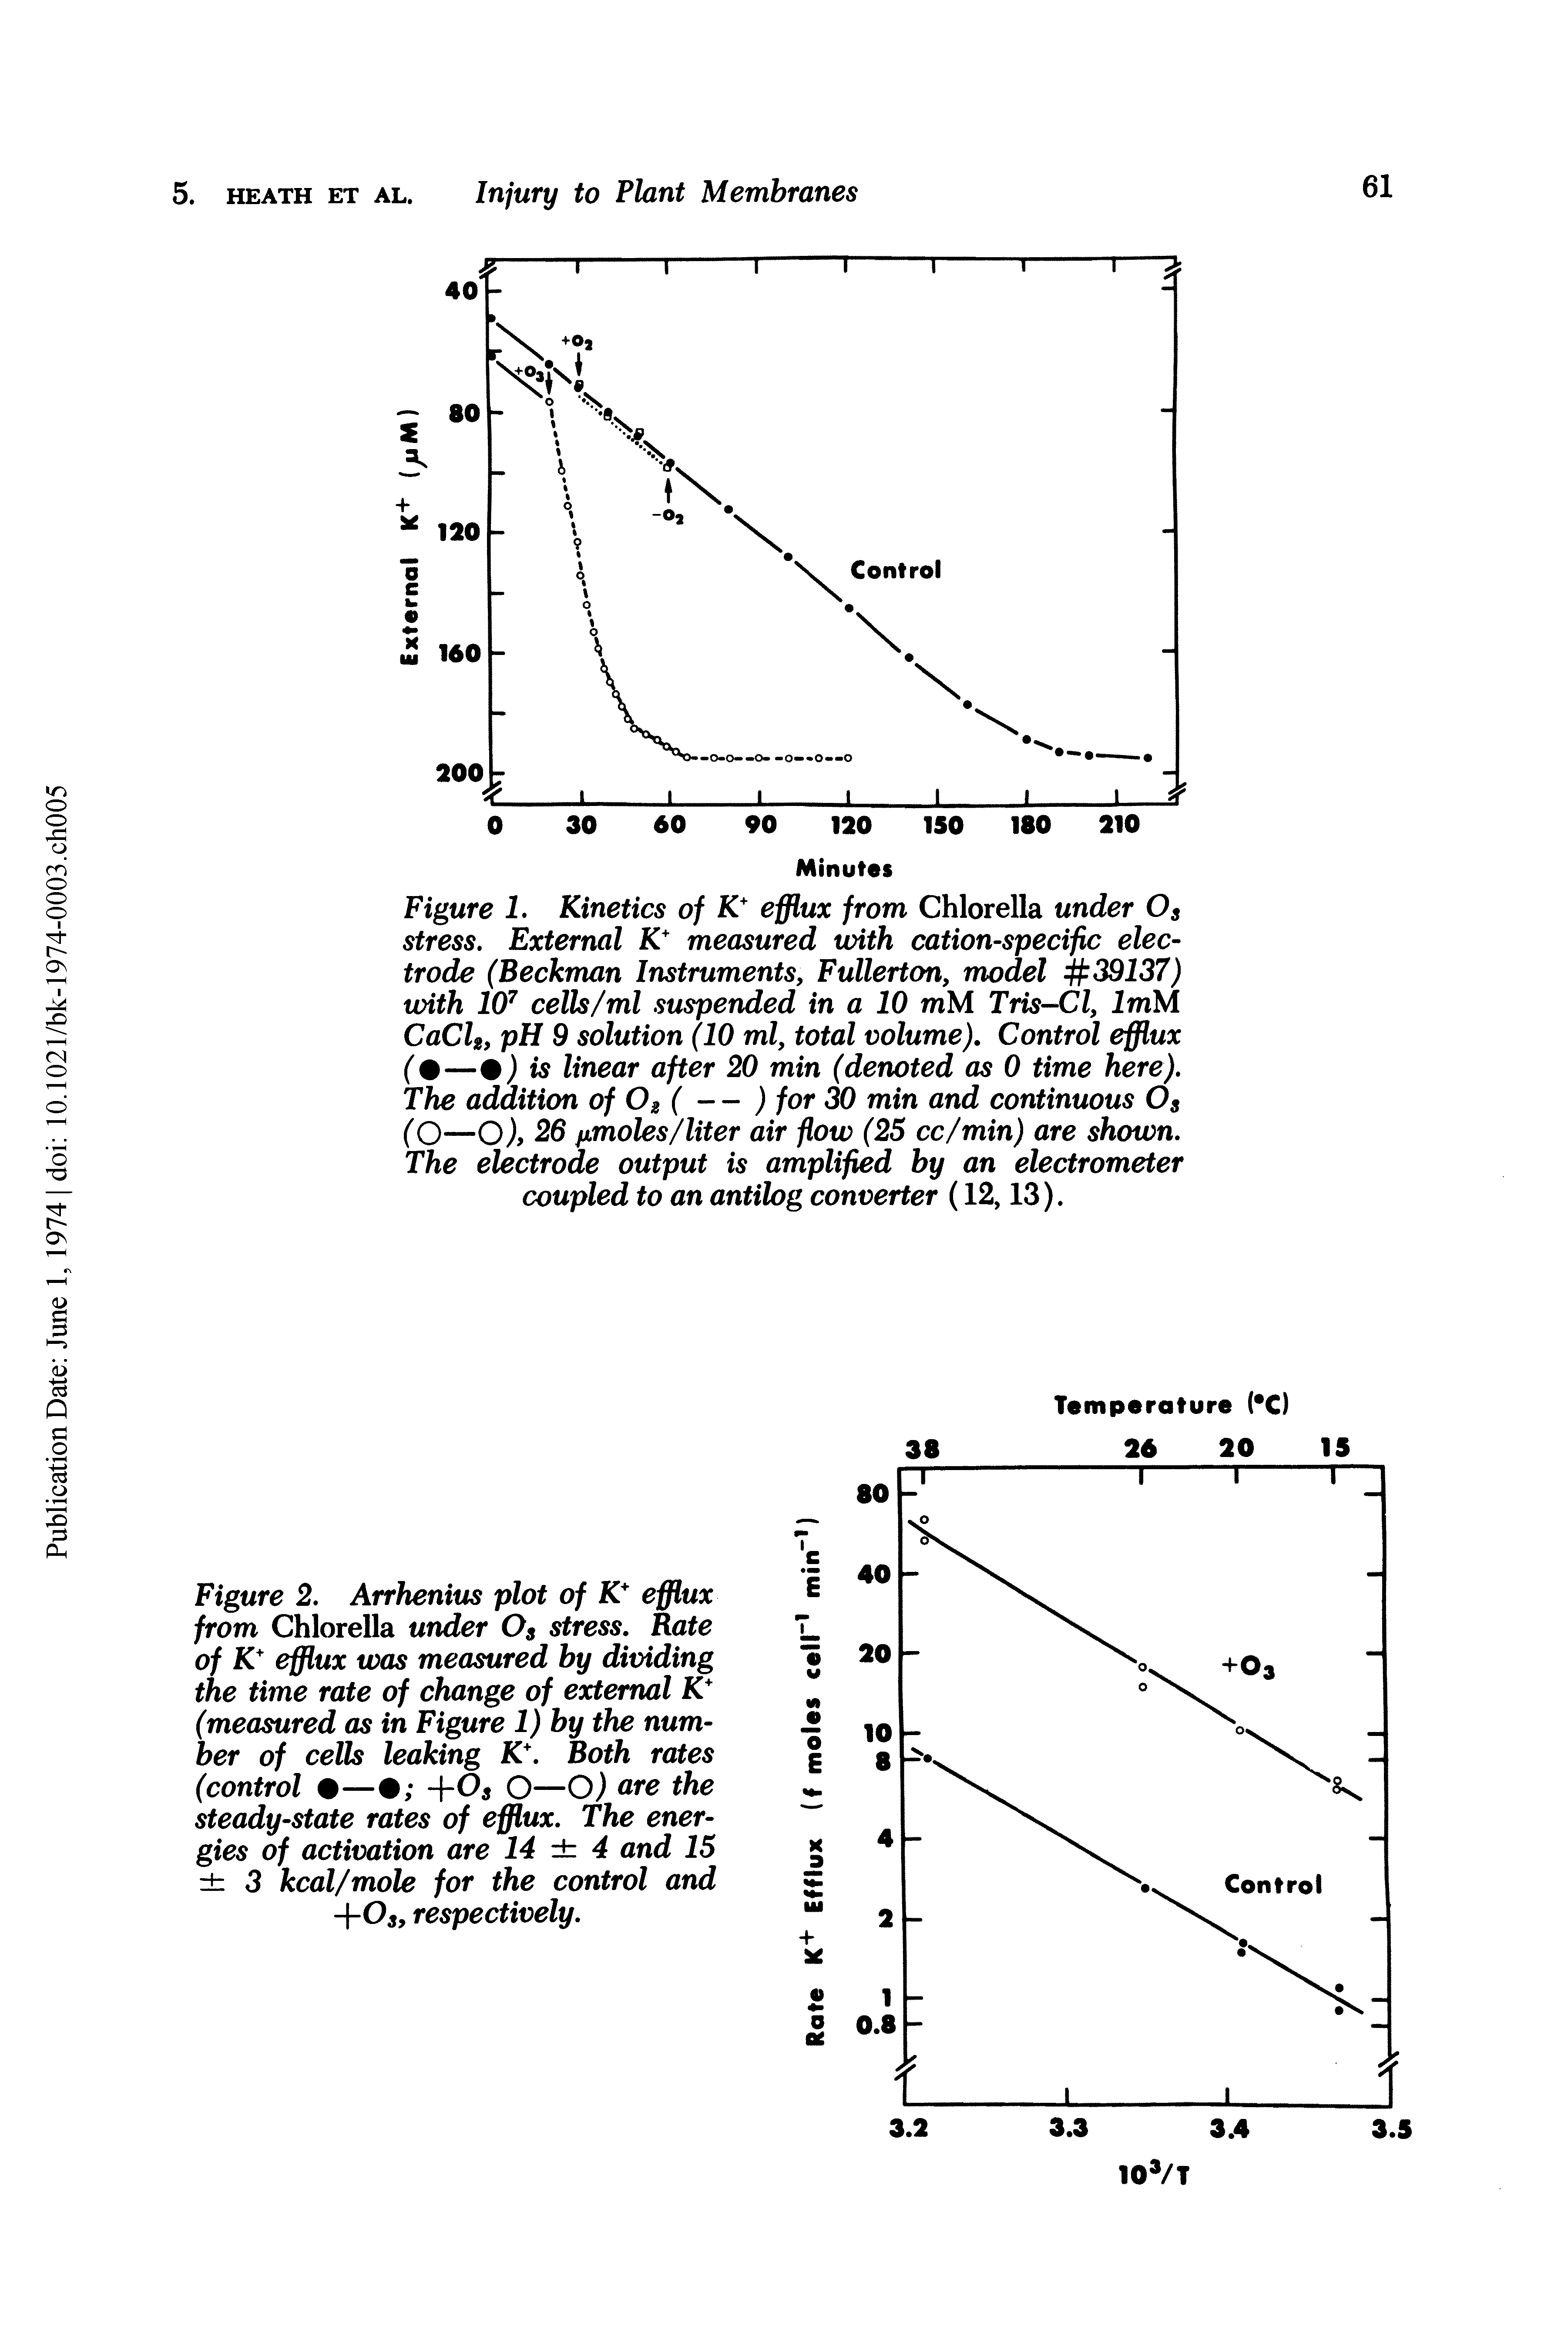 Figure 1. Kinetics of K efflux from Chlorella under Og stress. External K measured with cation-specific electrode (Beckman Instruments, Fullerton, model 39137) with 10" cells/ml suspended in a 10 mM Tris-Cl, ImM CaCU, pH 9 solution (10 ml, total volume). Control efflux (0—0) is linear after 20 min (denoted as 0 time here). The addition of Og ( — ) for 30 min and continuous Og (O—O), 26 fimoles/liter air flow (25 cc/min) are shown. The electrode output is amplified by an electrometer coupled to an antilog converter (12,13).